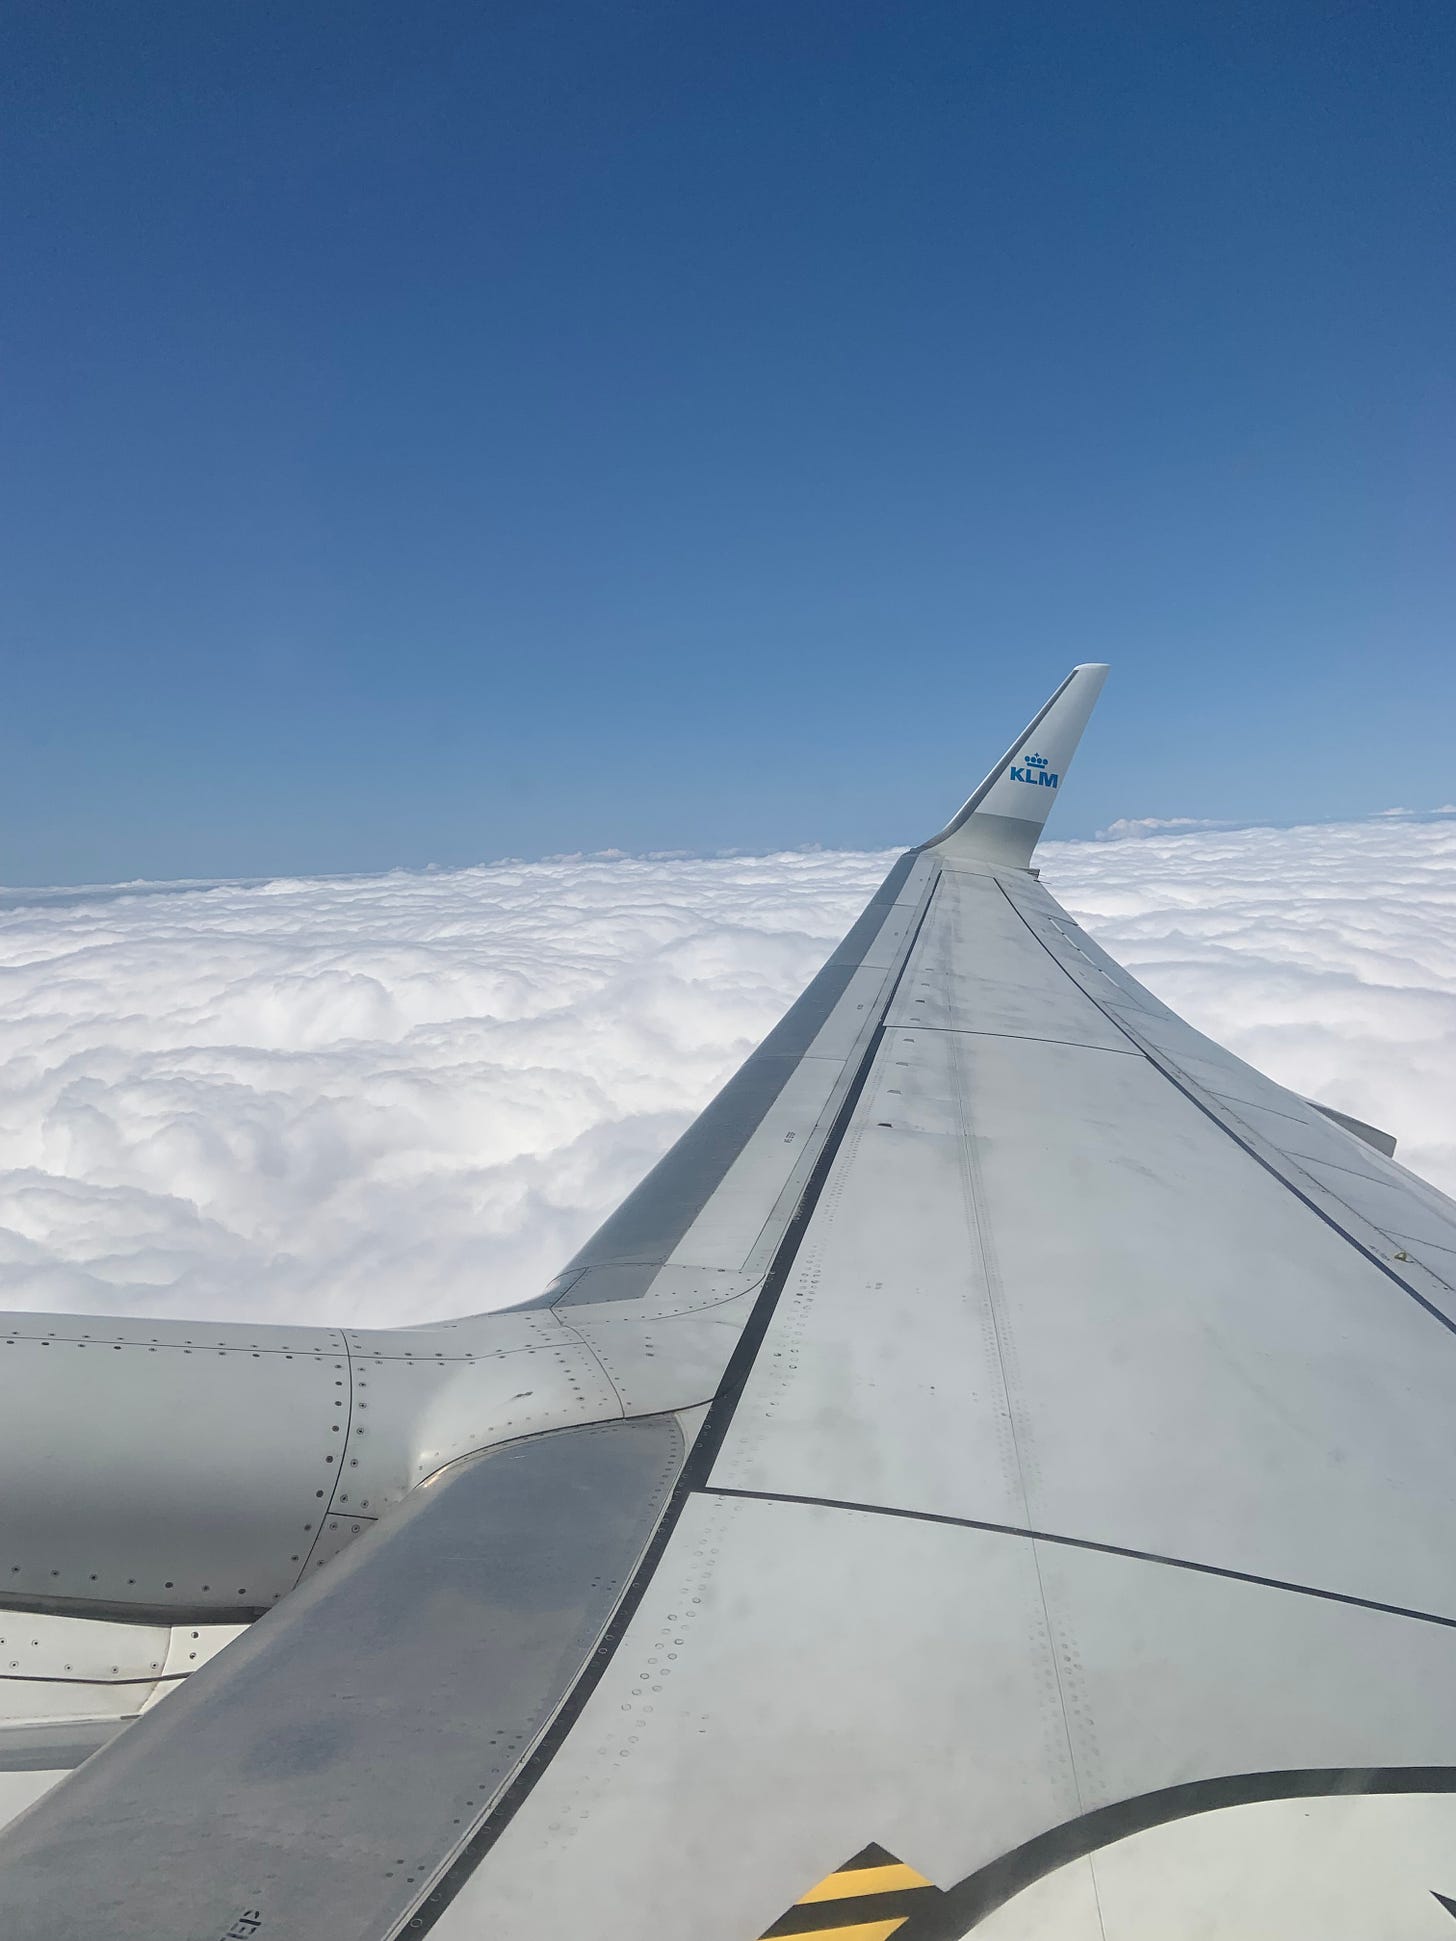 A photo of a KLM airplane wing above the clouds